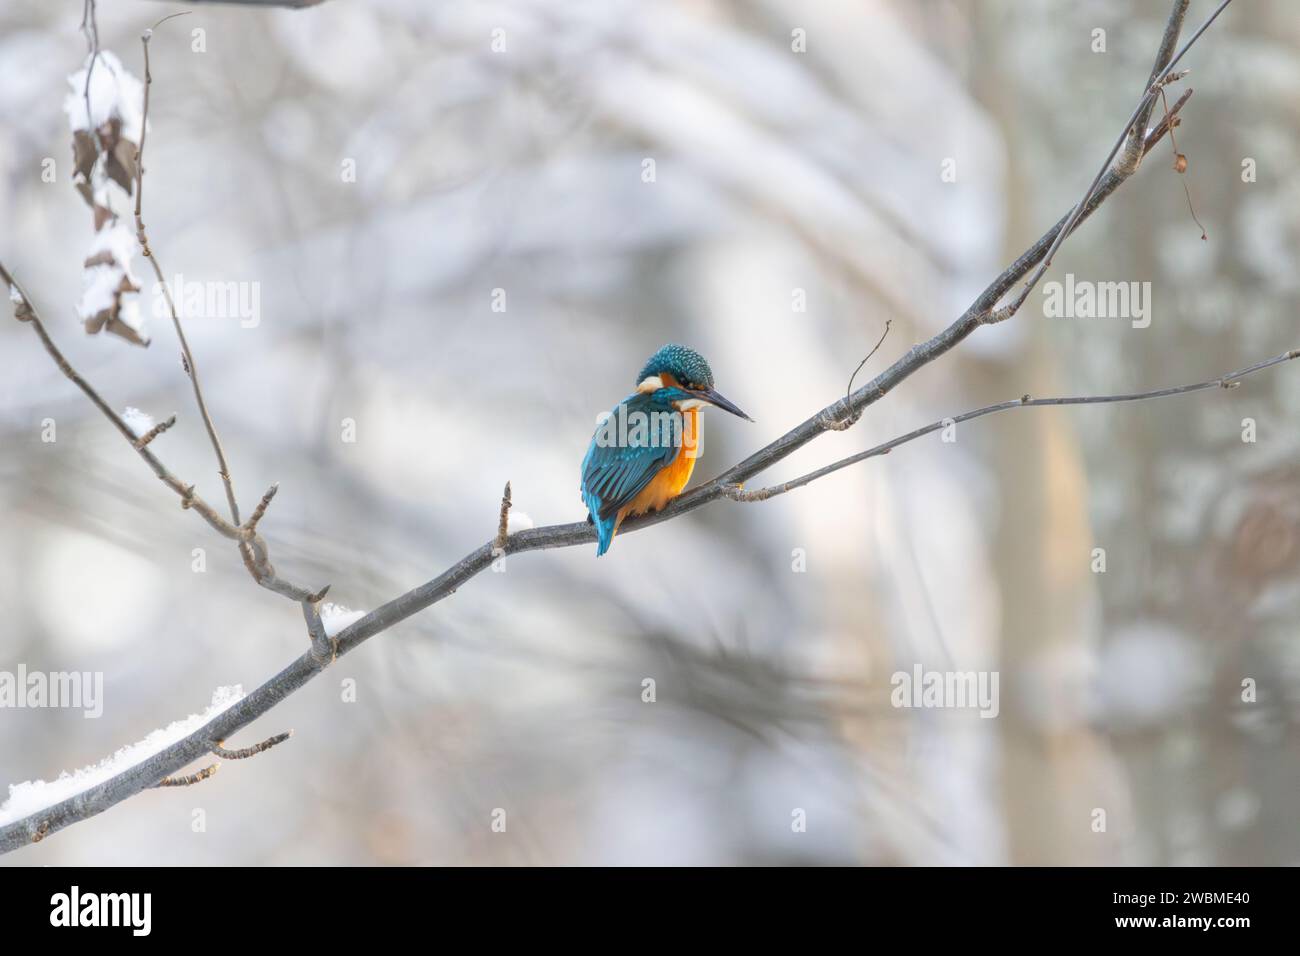 A kingfisher spending the winter by a flowing river in a snowy forest in Estonia Stock Photo